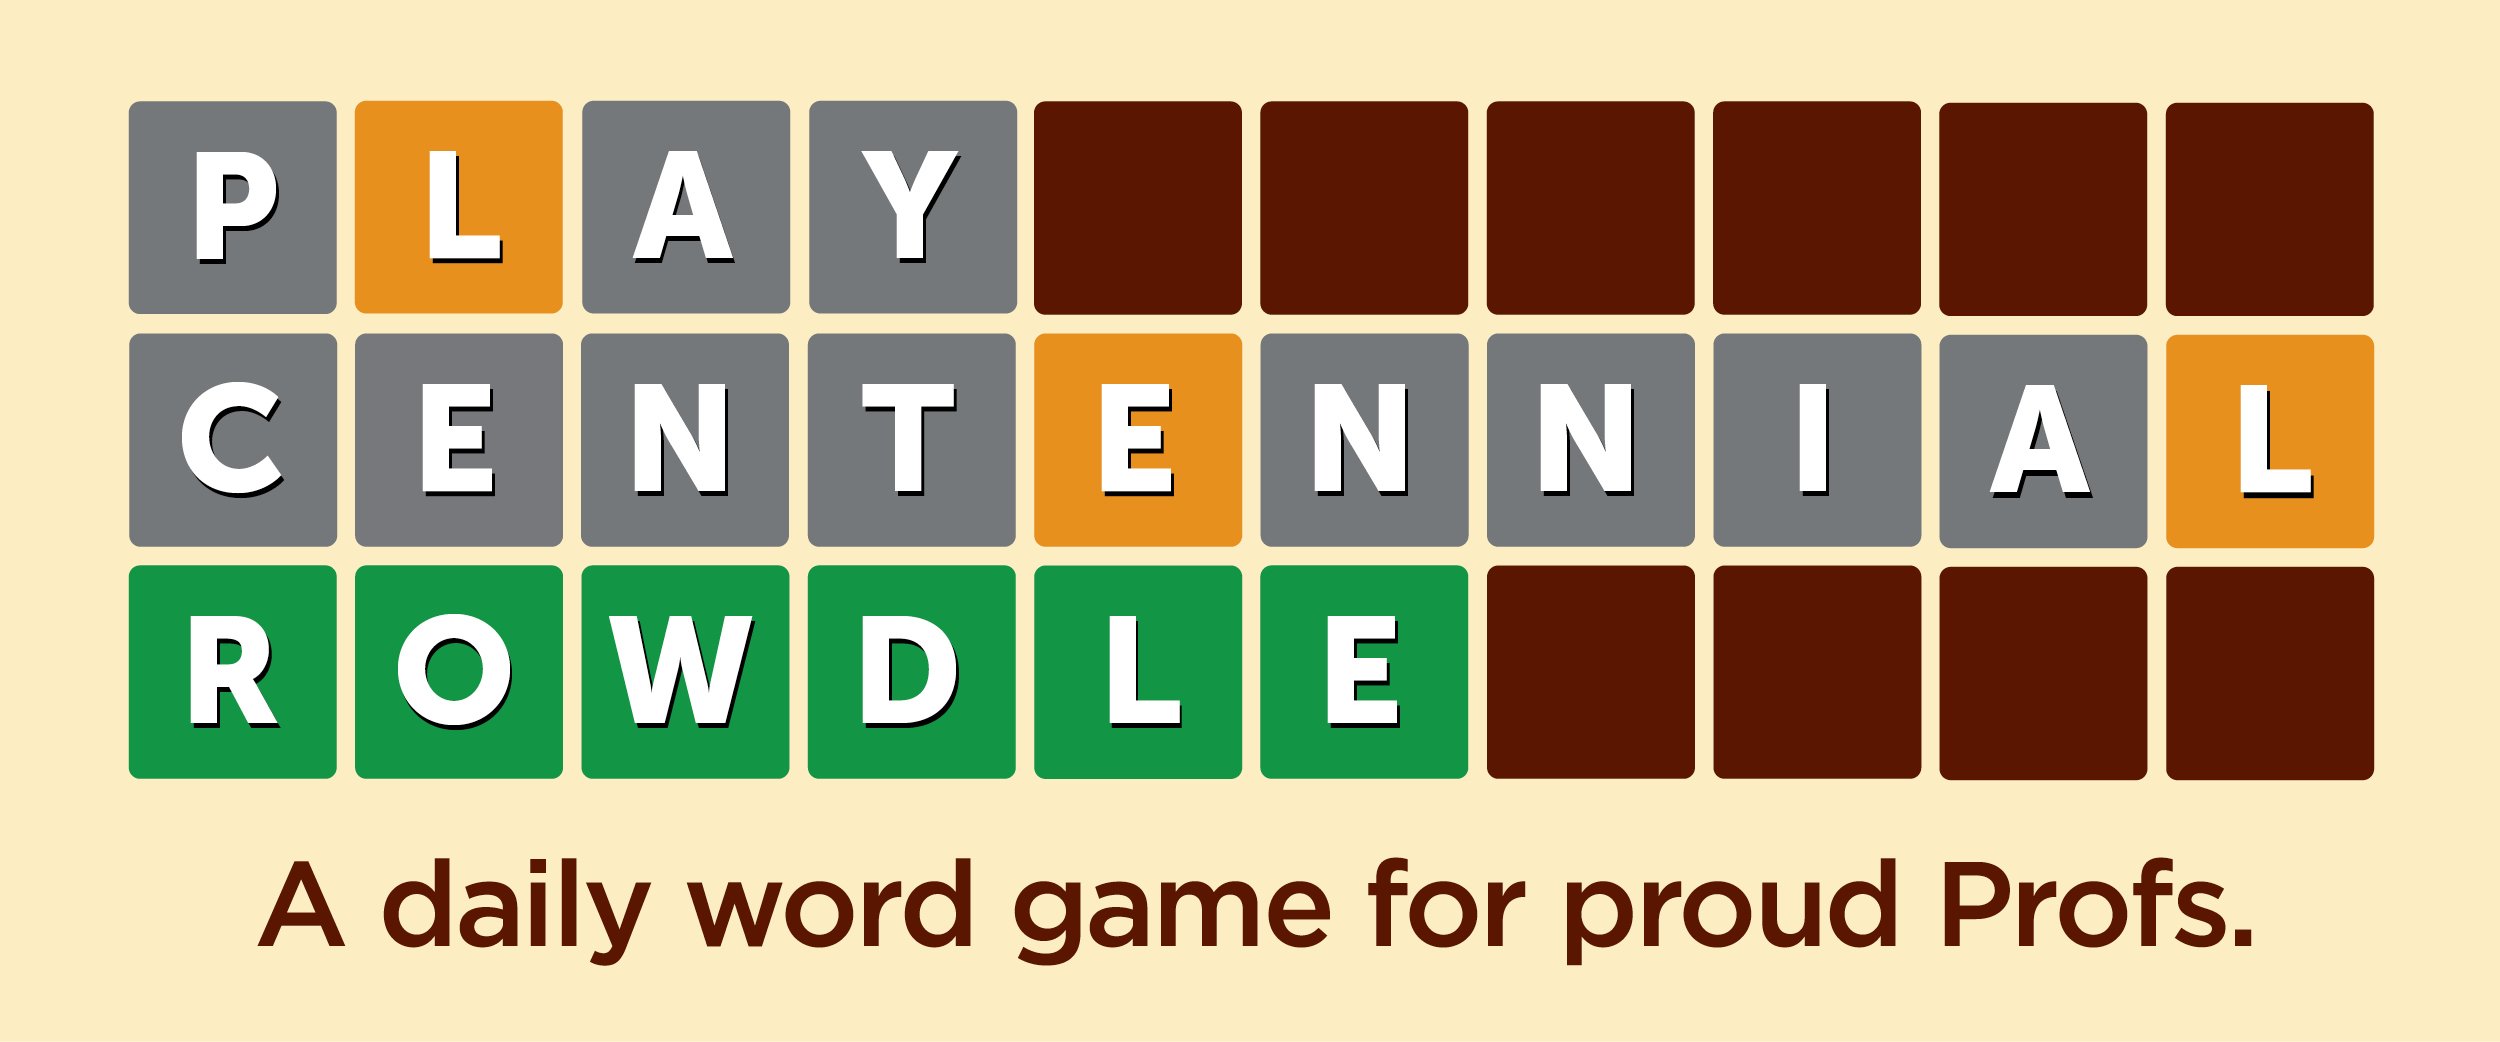 Play Centennial Rowdle: A Daily Word Game for Proud Profs.